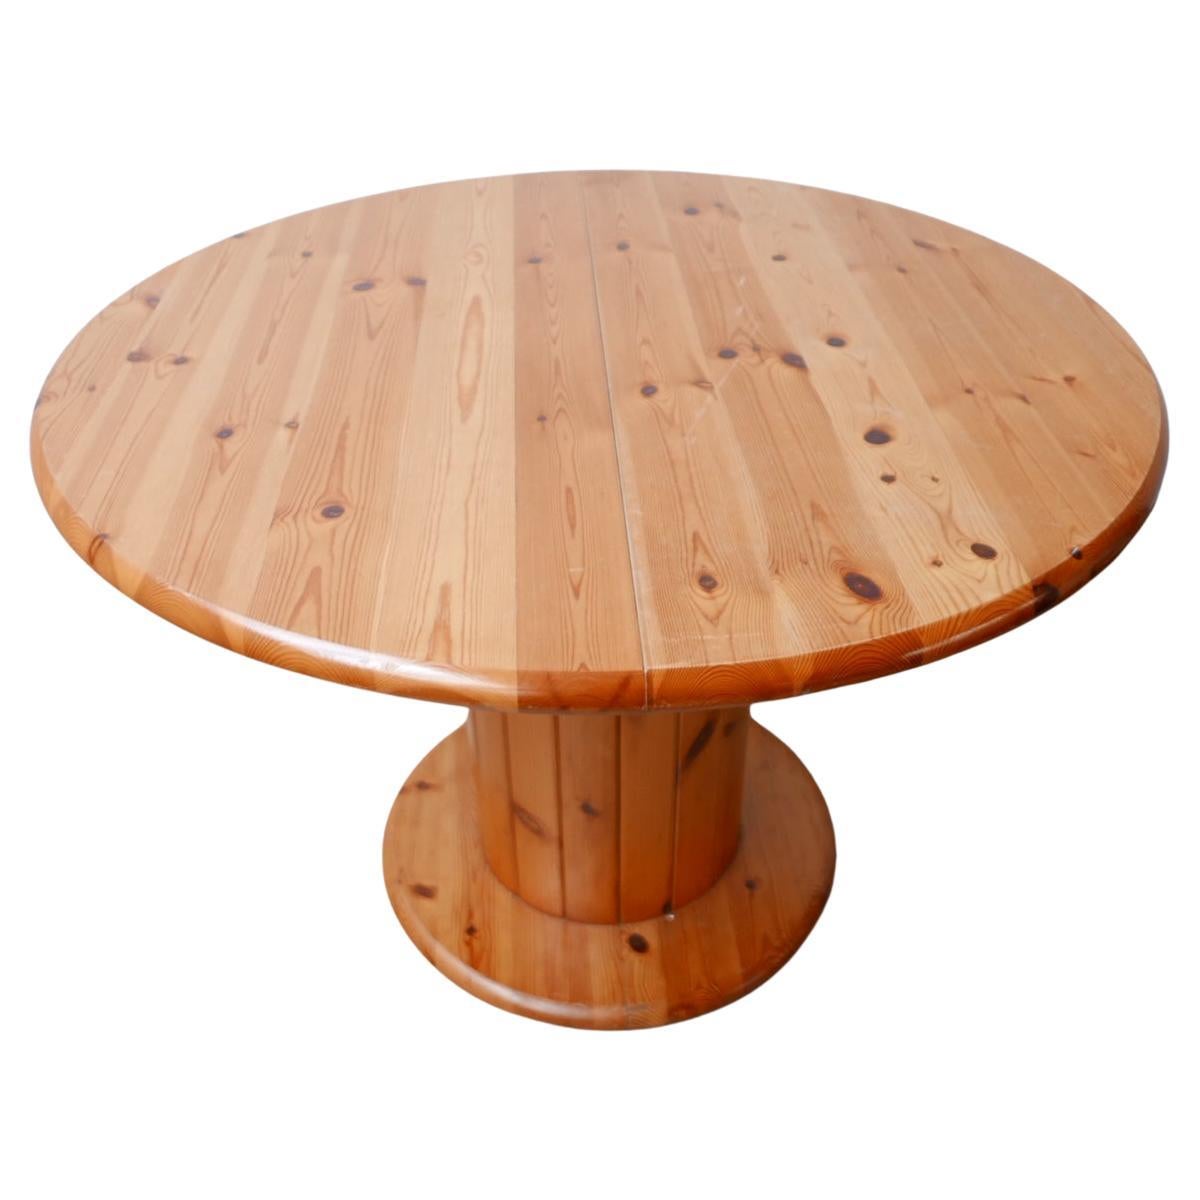 Pine Mid-Century Dutch Dining Table For Sale at 1stDibs